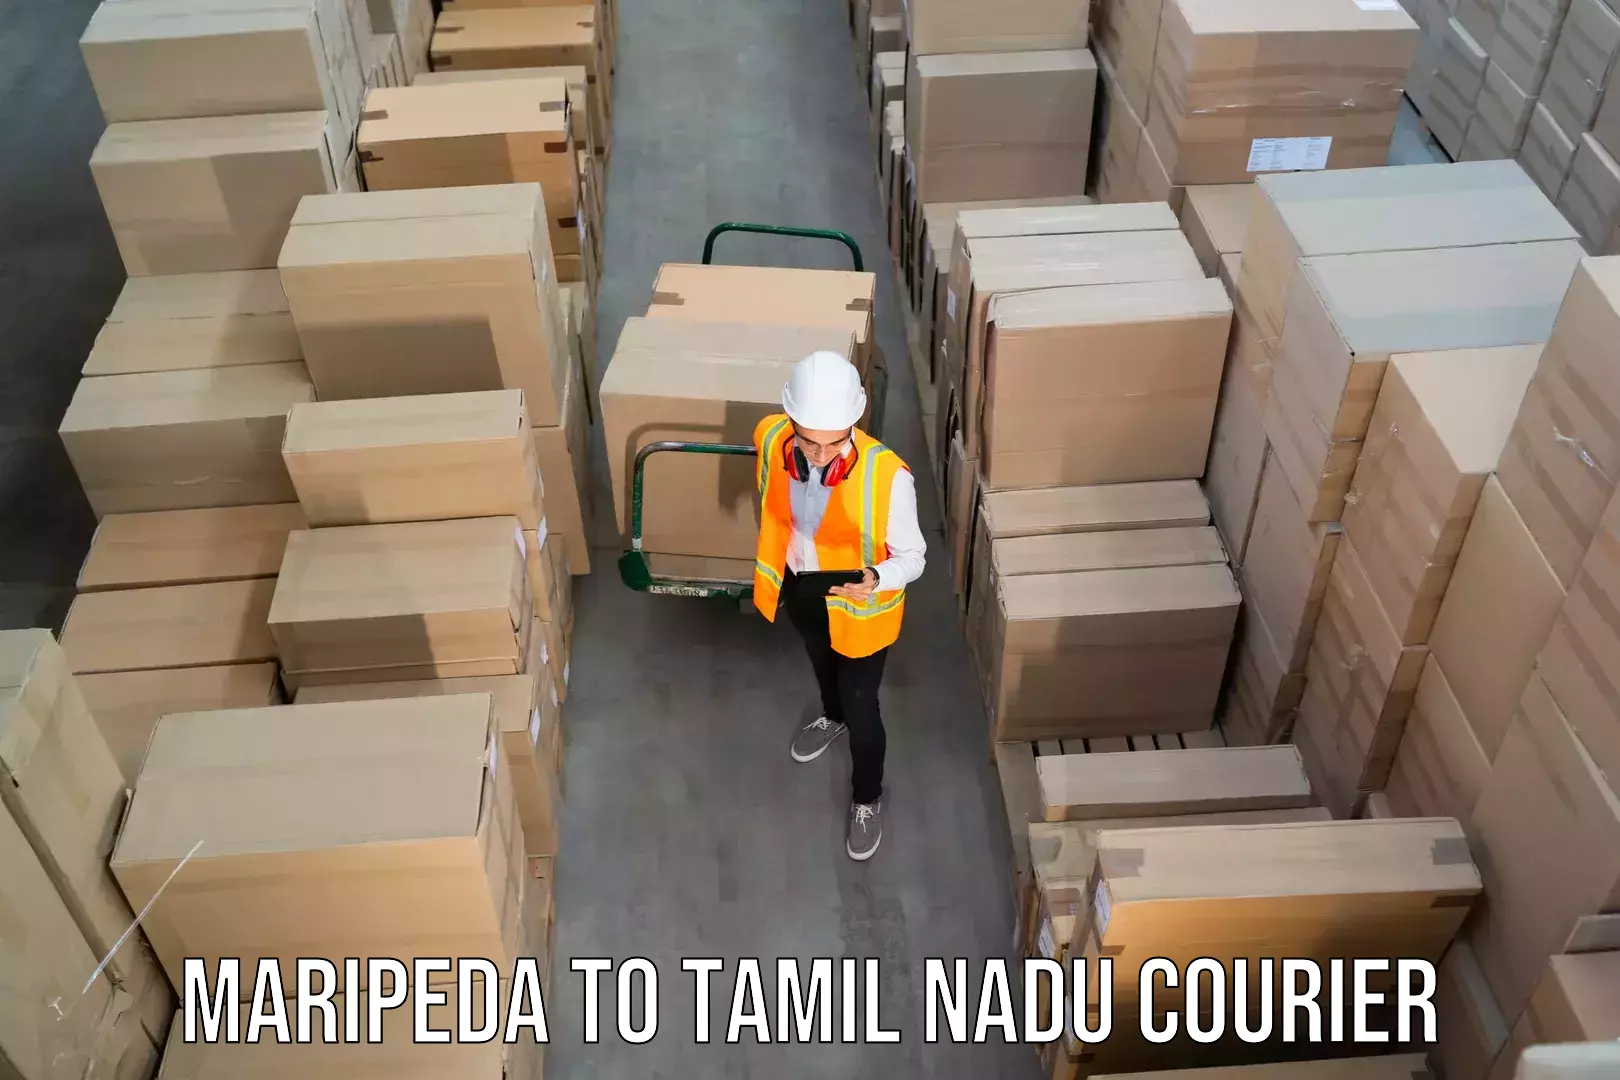 Weekend courier service in Maripeda to Tamil Nadu